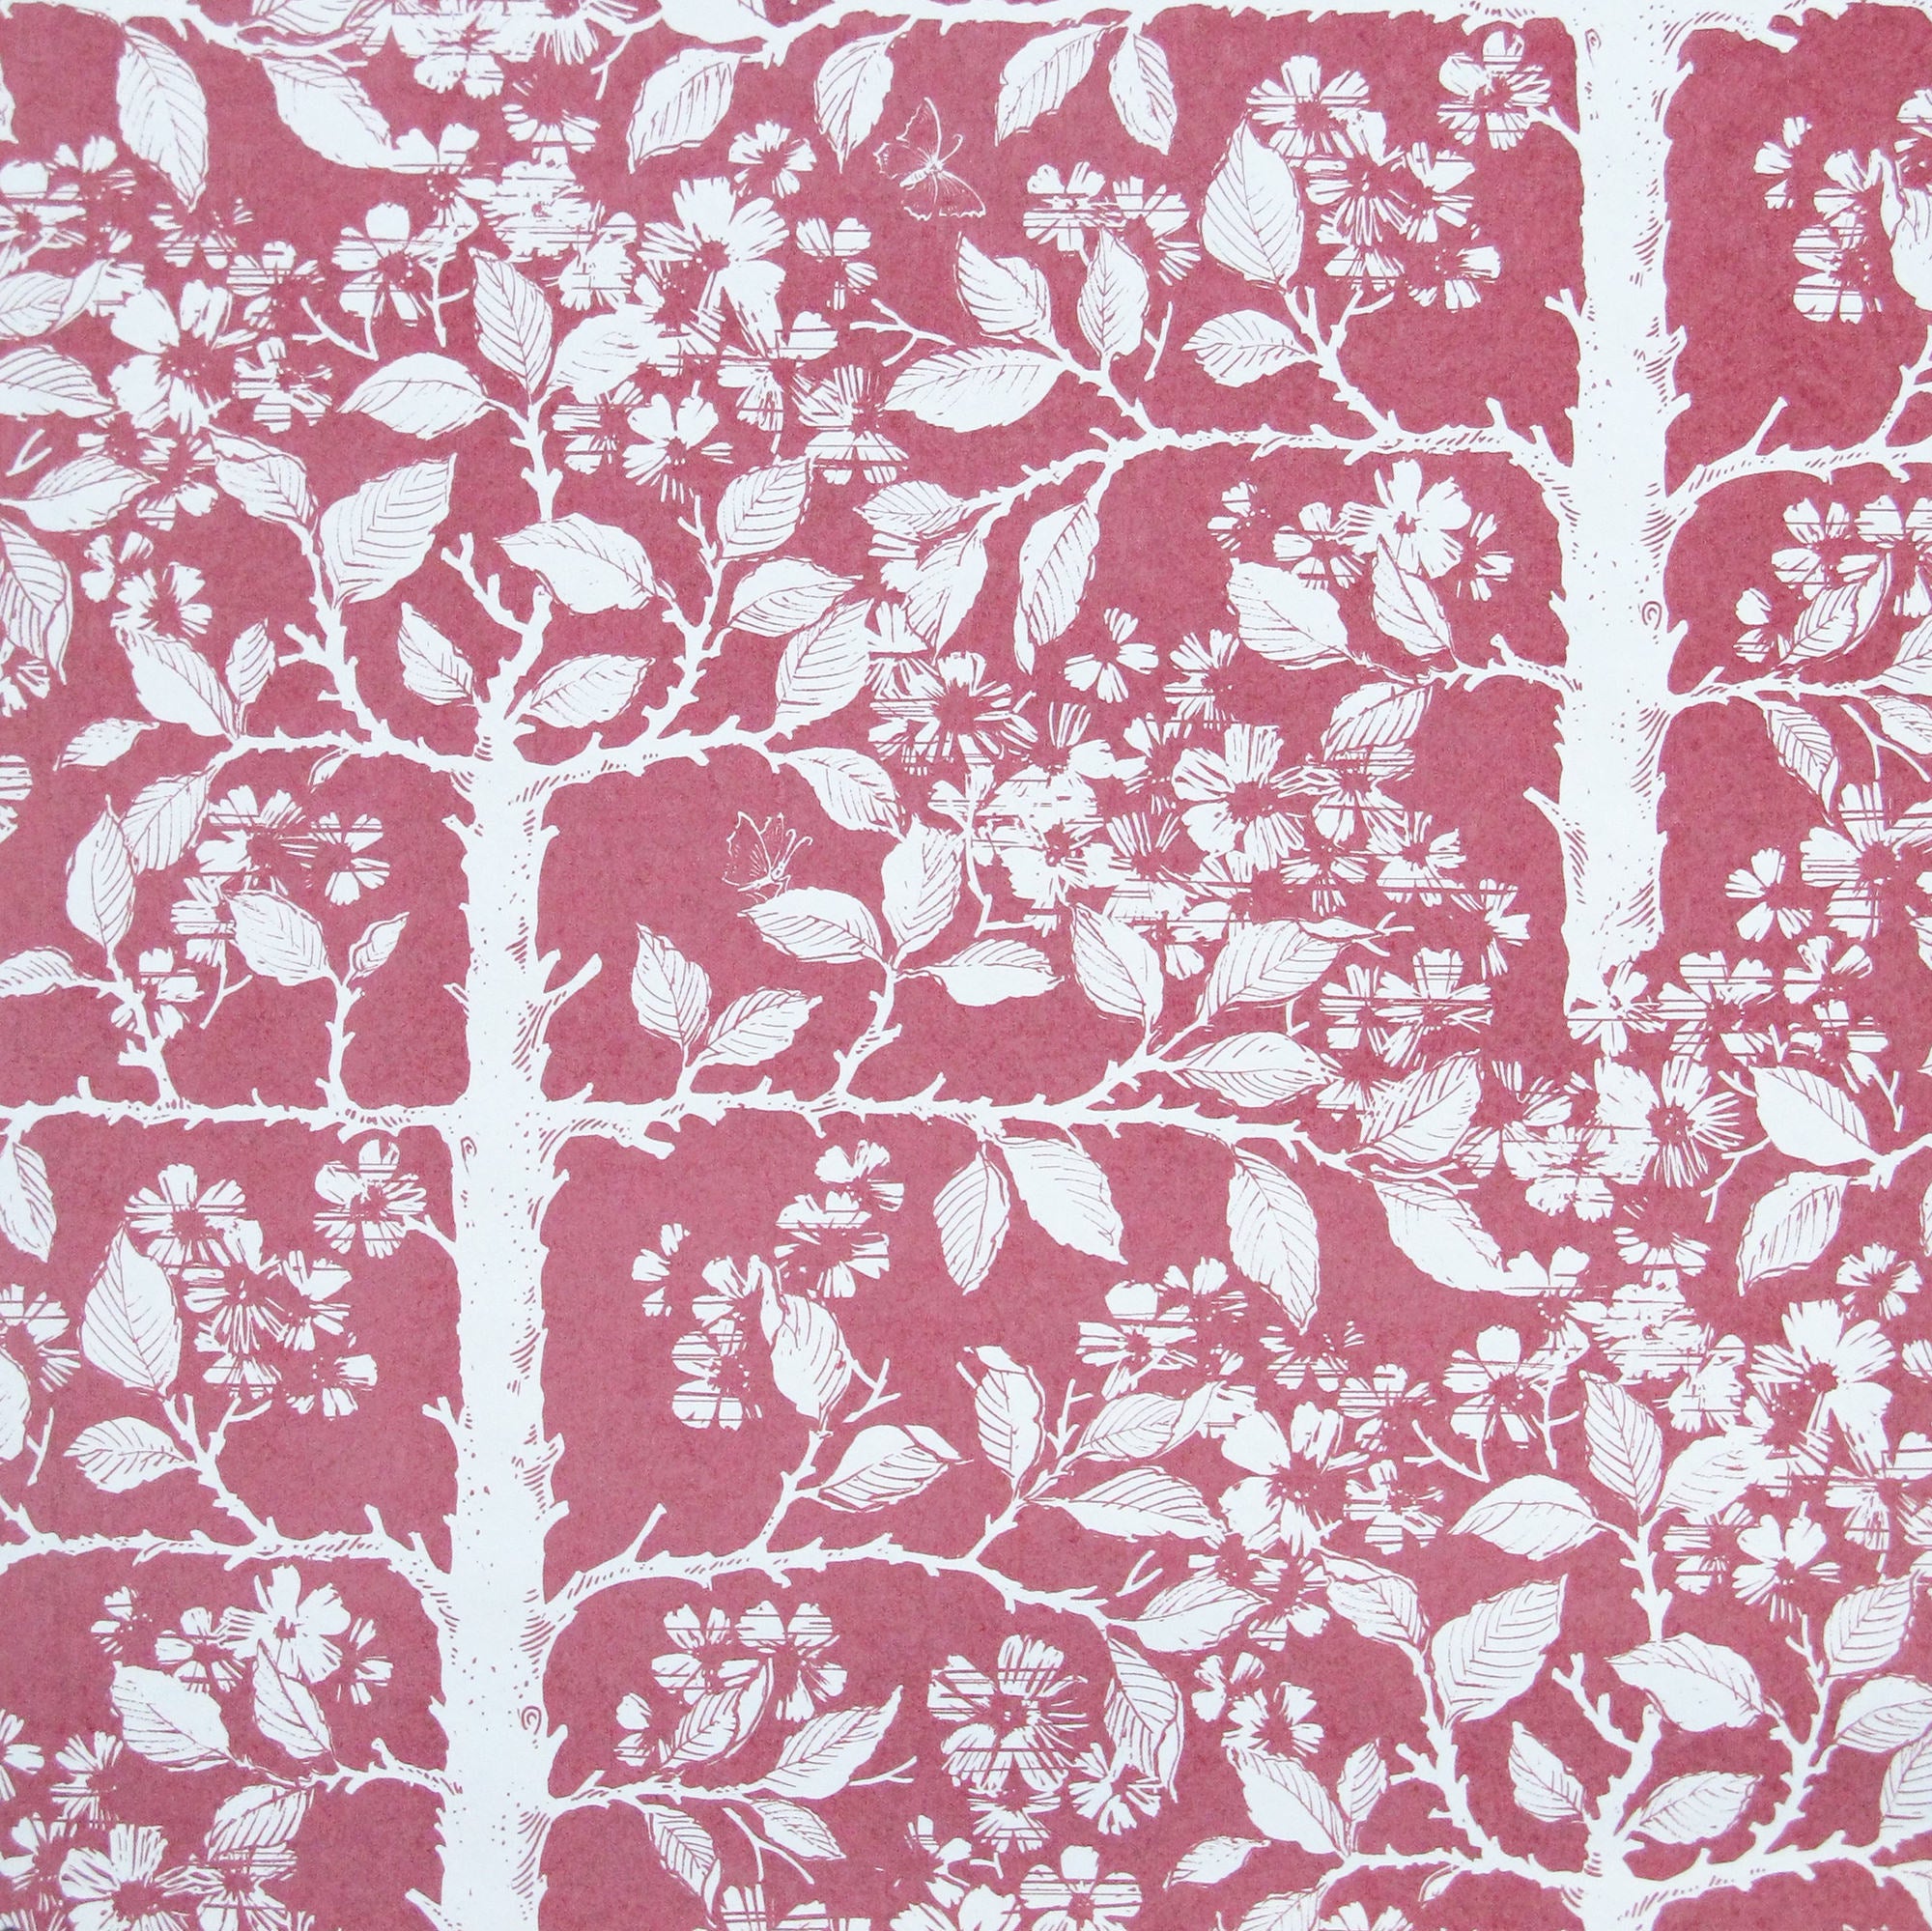 Detail of wallpaper in a large-scale tree and leaf print in white on a rose field.